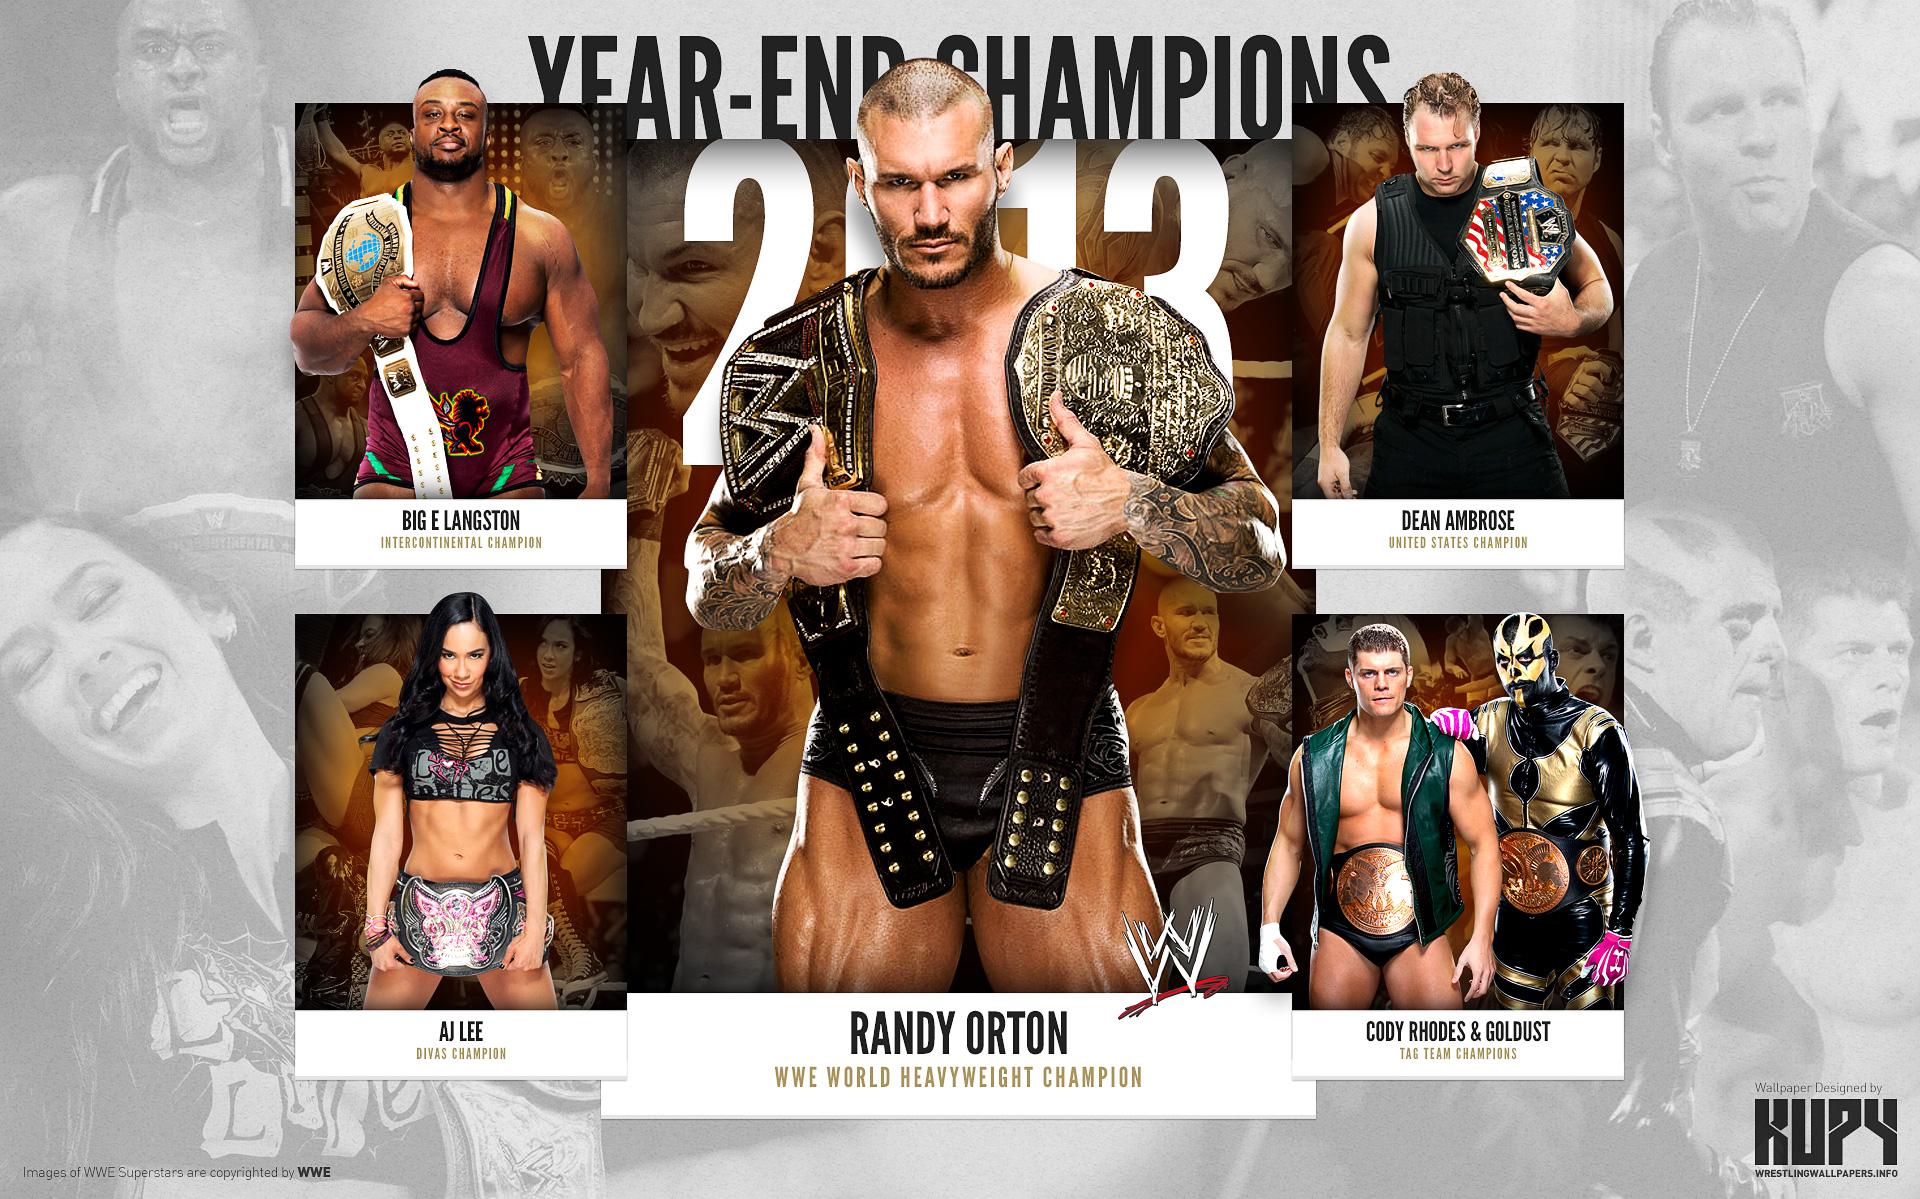 NEW 2013 WWE Year End Champions wallpaper   Kupy Wrestling Wallpapers